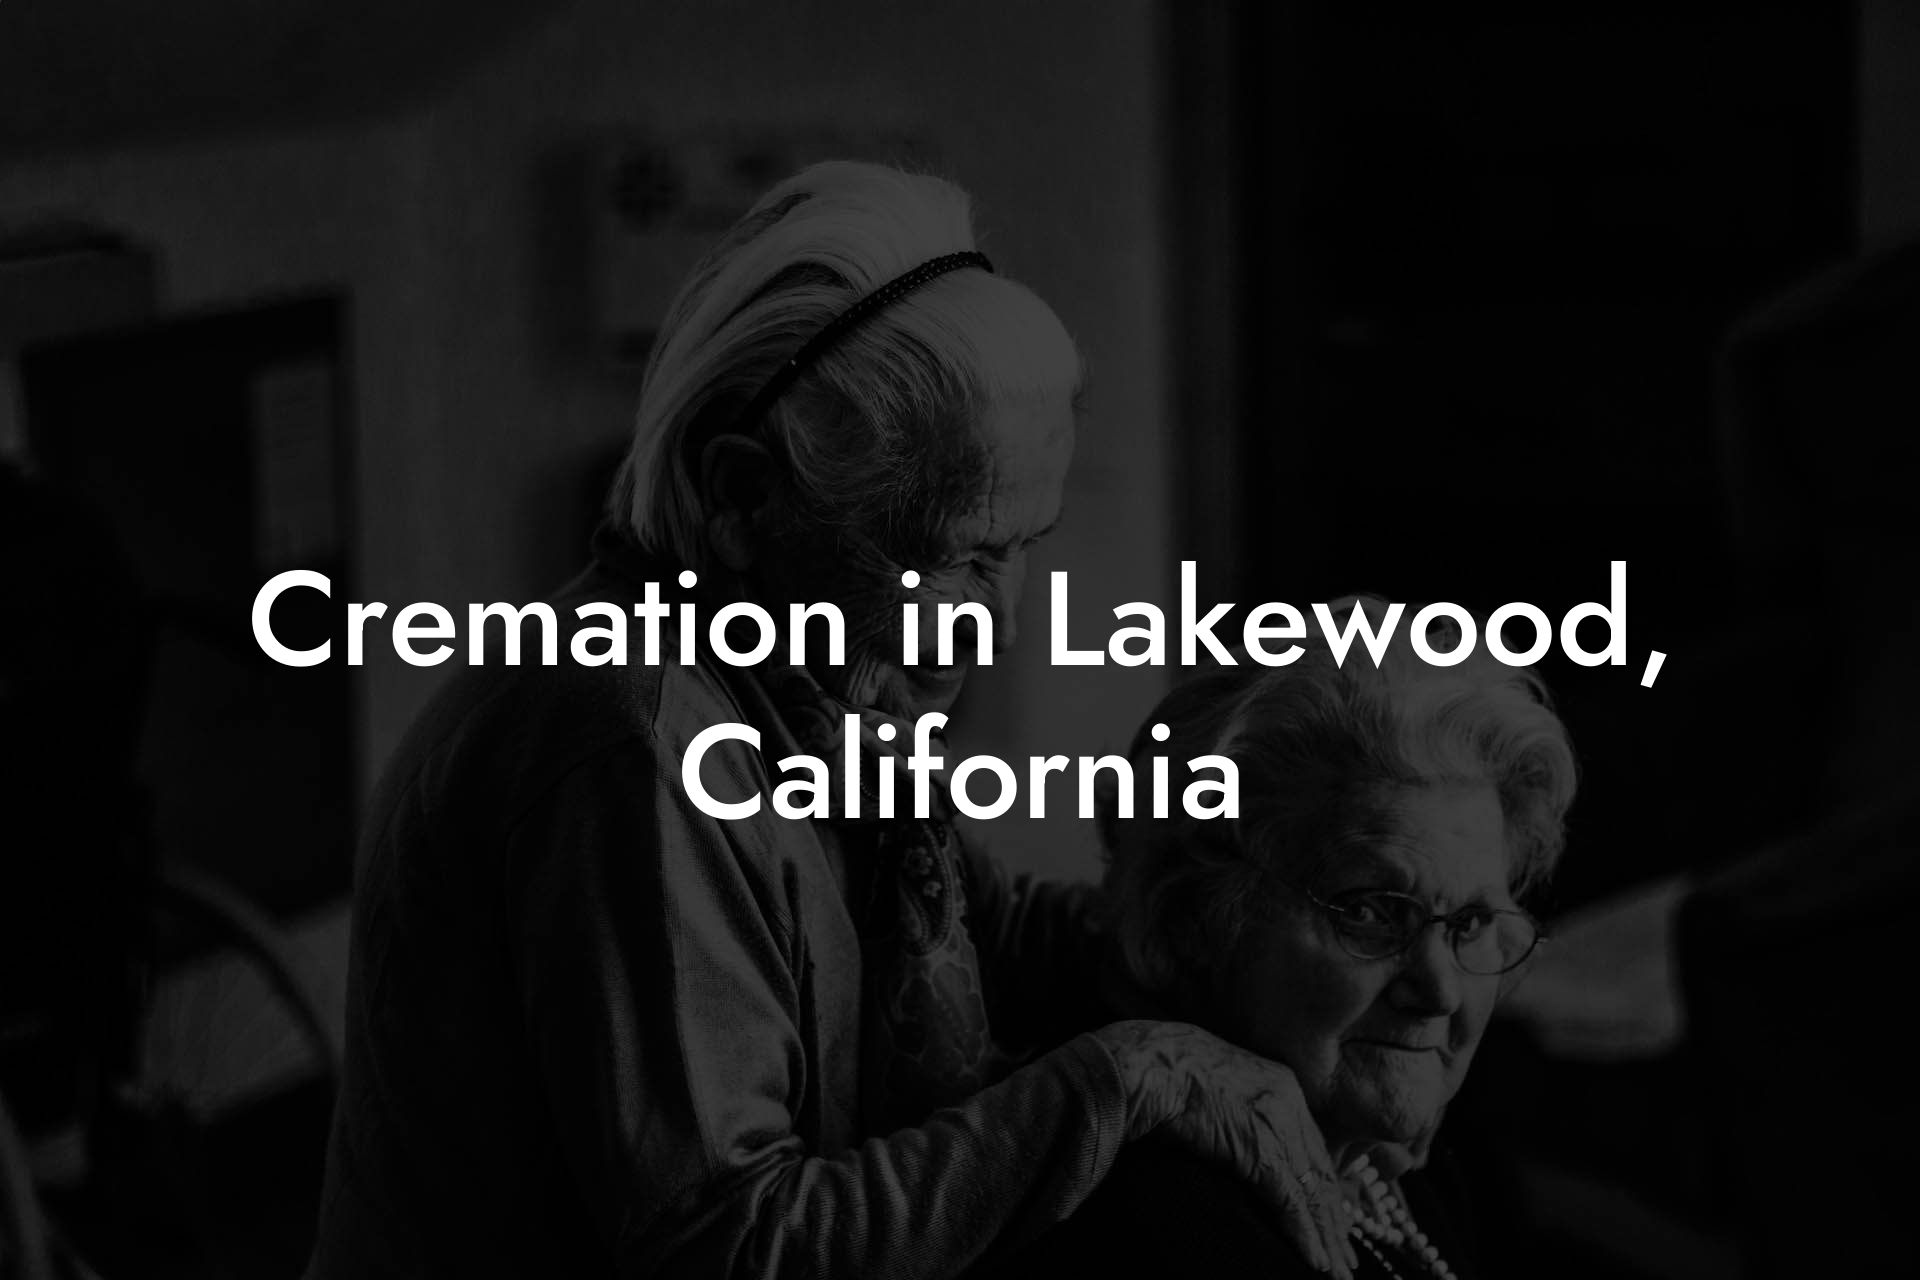 Cremation in Lakewood, California